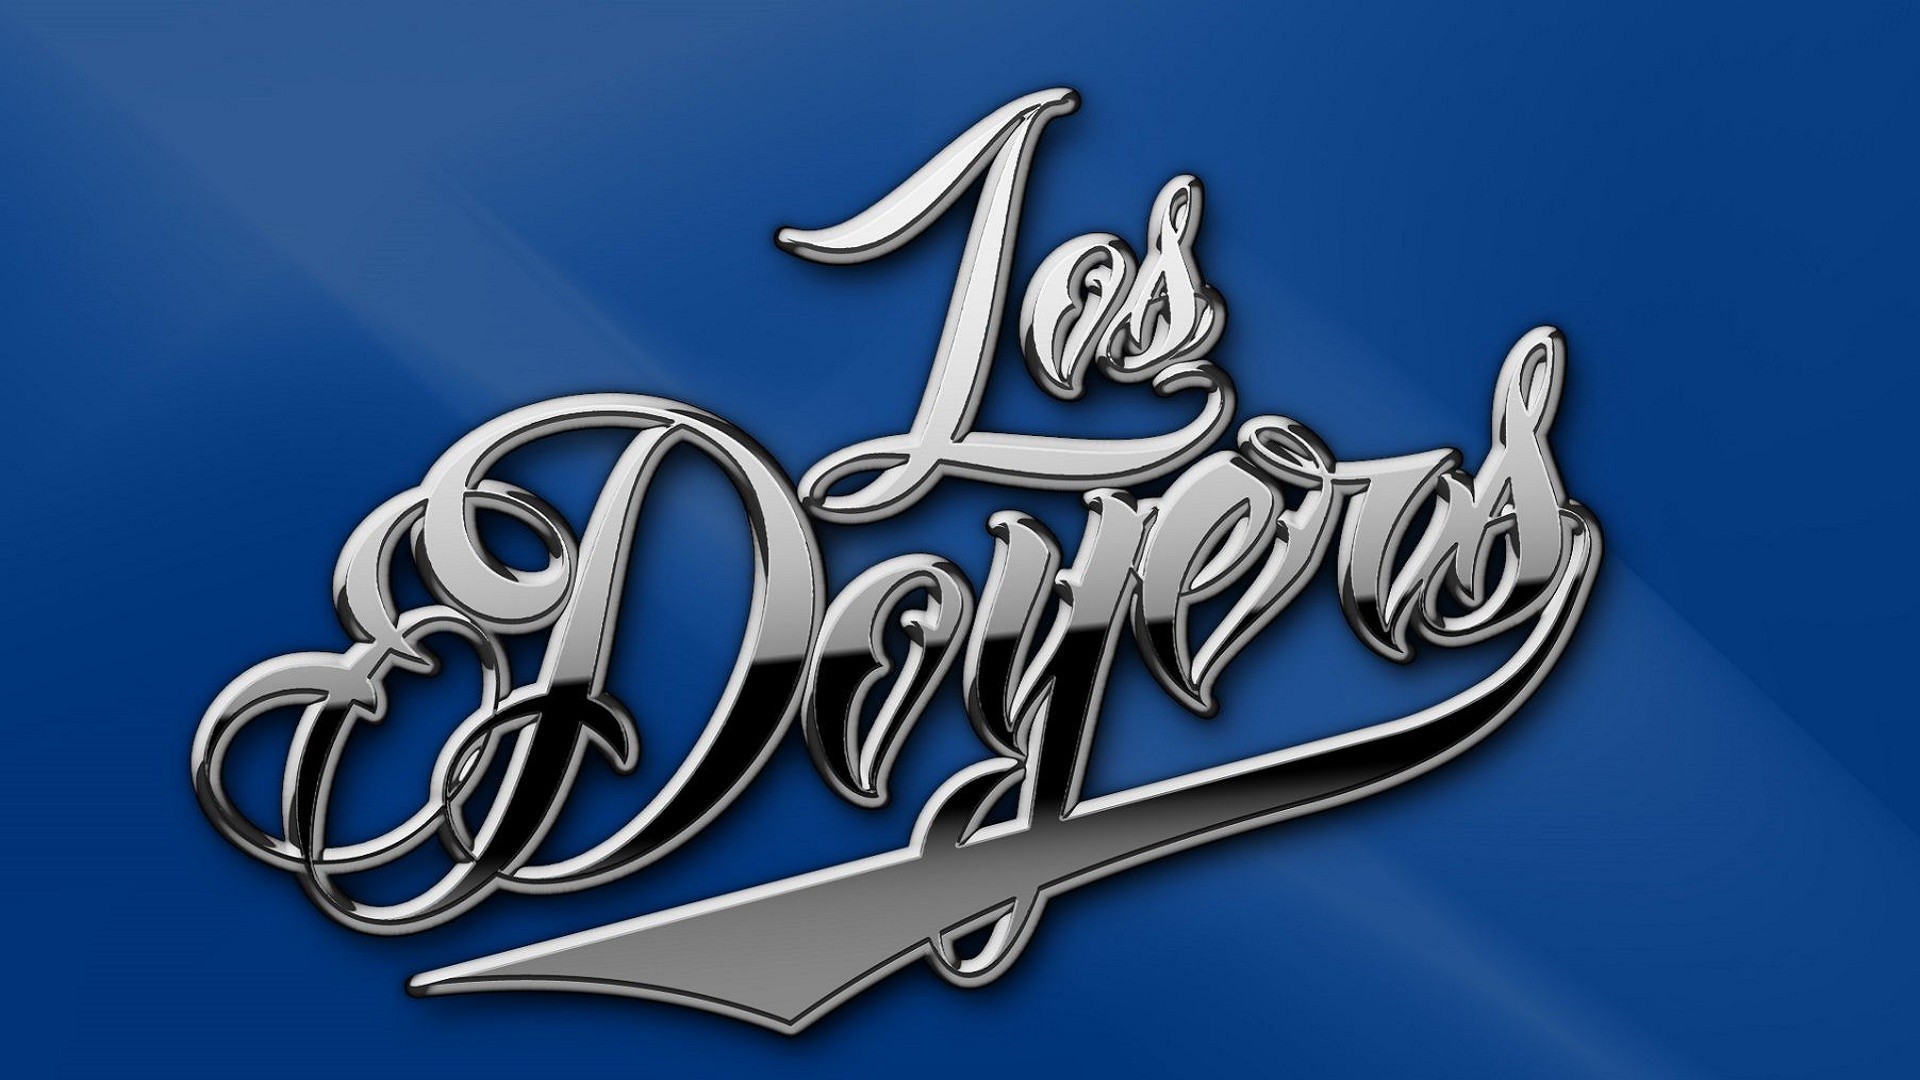 Los Angeles Dodgers MLB Laptop Wallpaper With high-resolution 1920X1080 pixel. You can use this wallpaper for Mac Desktop Wallpaper, Laptop Screensavers, Android Wallpapers, Tablet or iPhone Home Screen and another mobile phone device